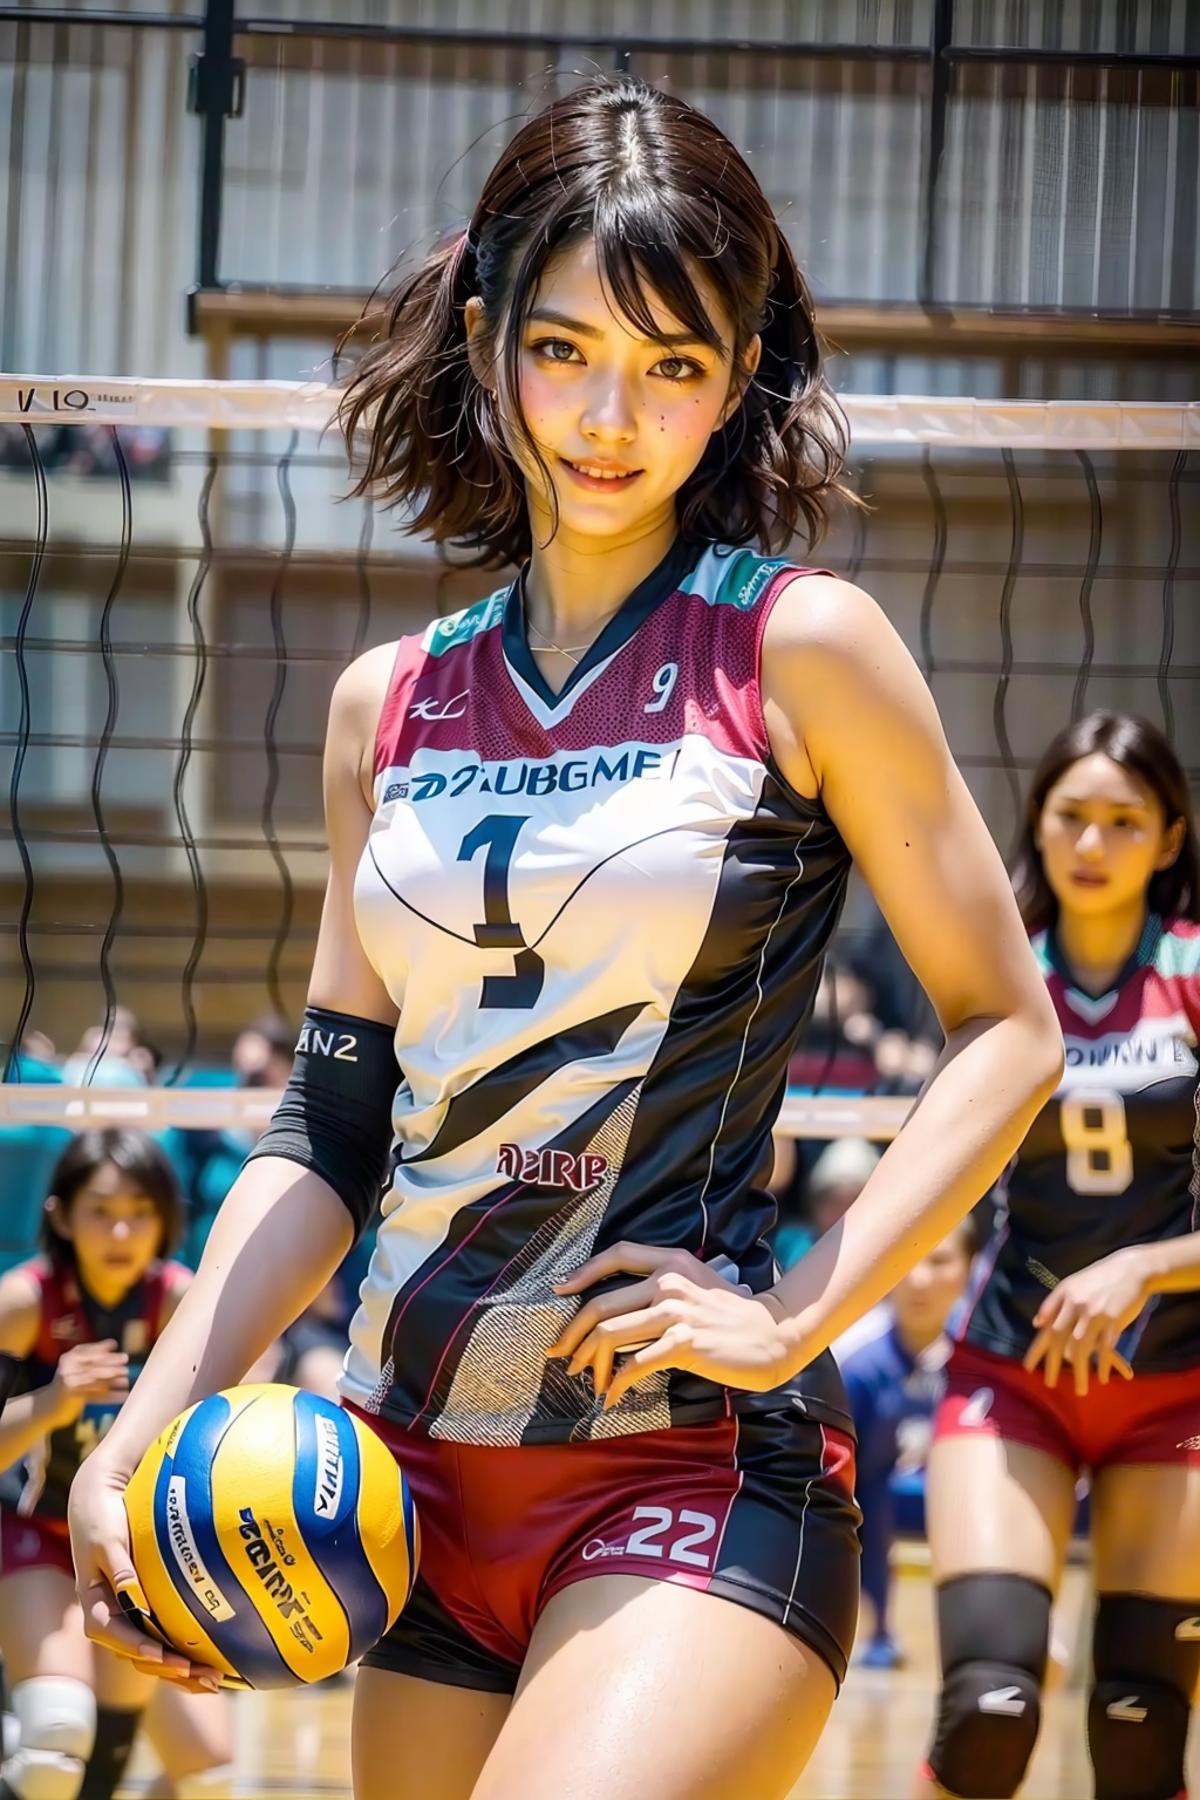 Volleyball Uniform | LyCORIS and LoRA image by feetie